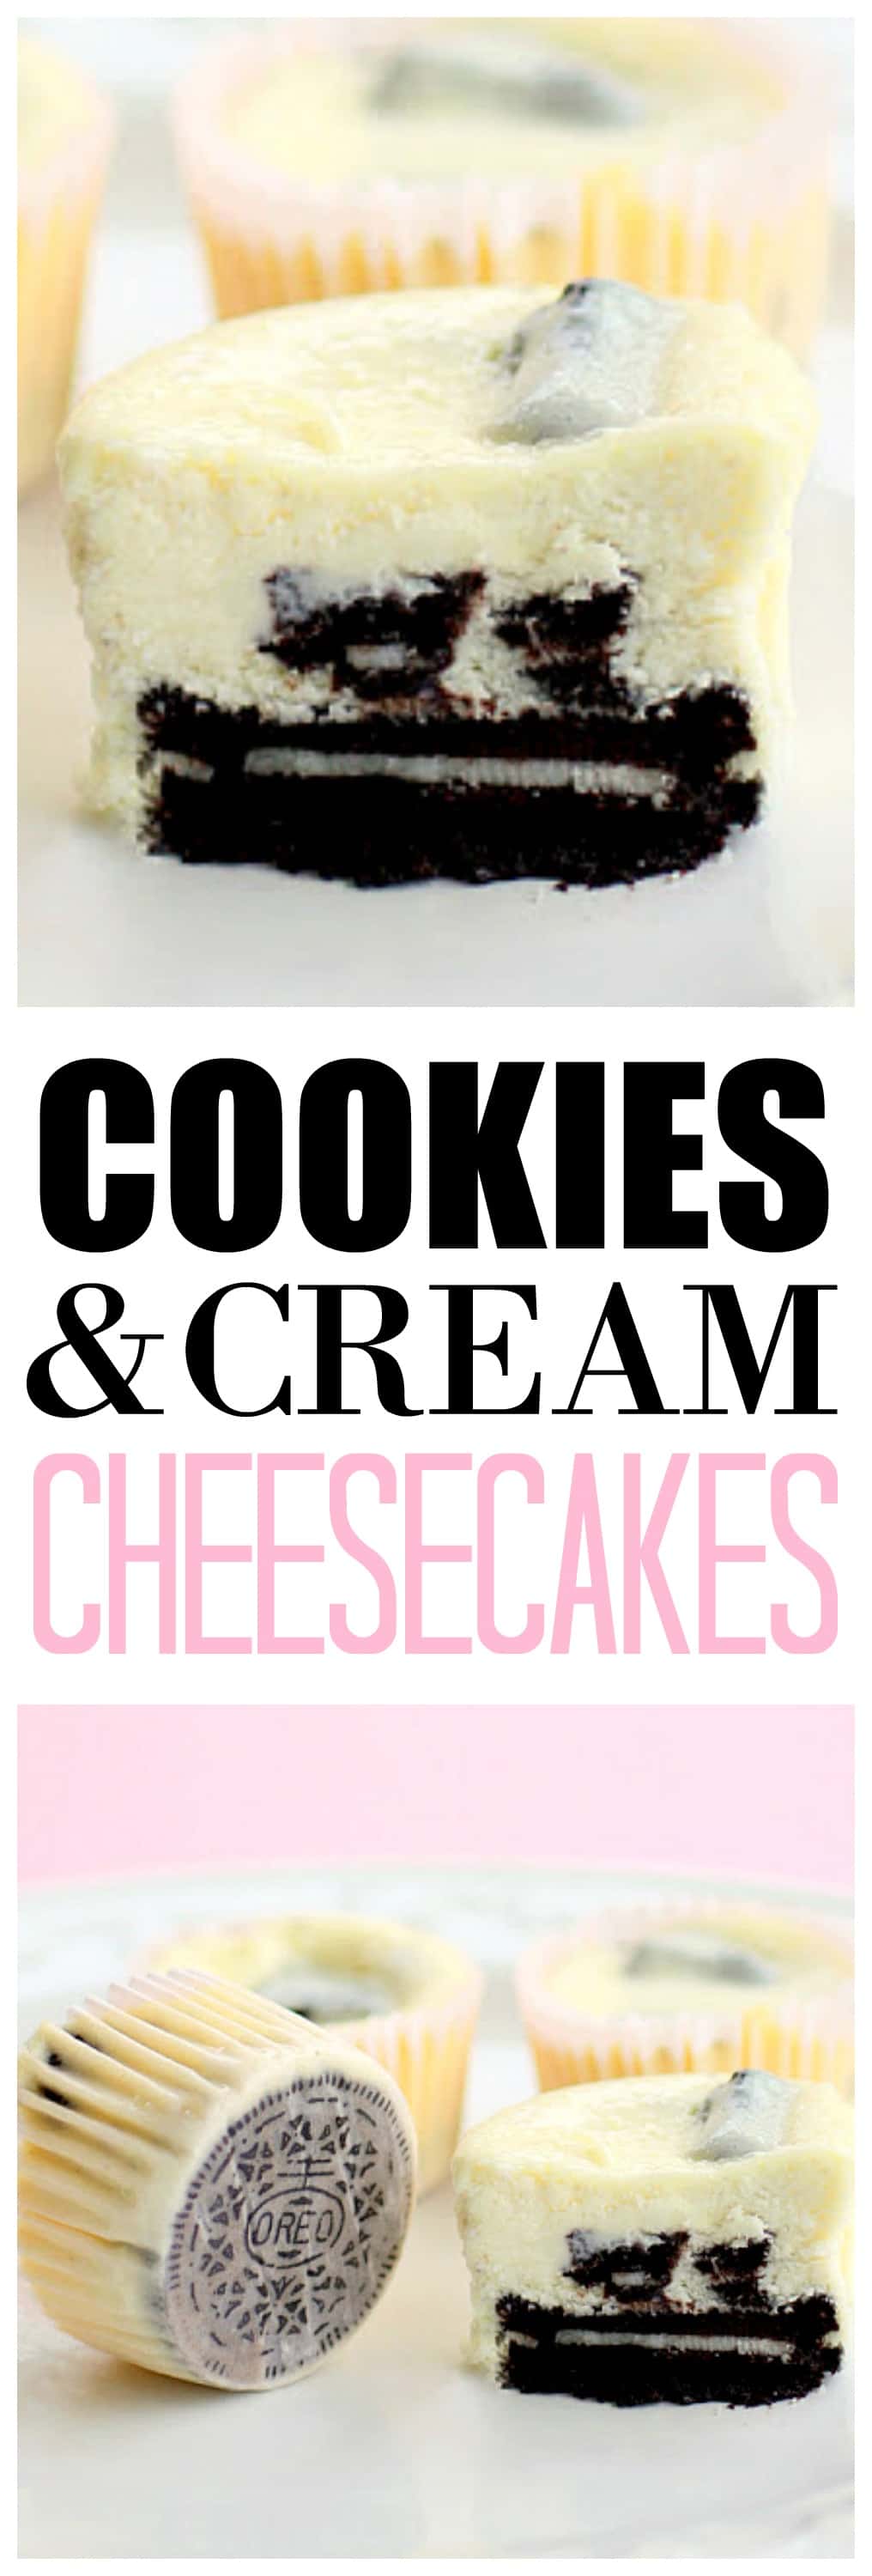 The Cookies and Cream Cheesecakes couldn't be any easier. Each one has a full Oreo as the crust! #oreo #cheesecake #dessert #recipe